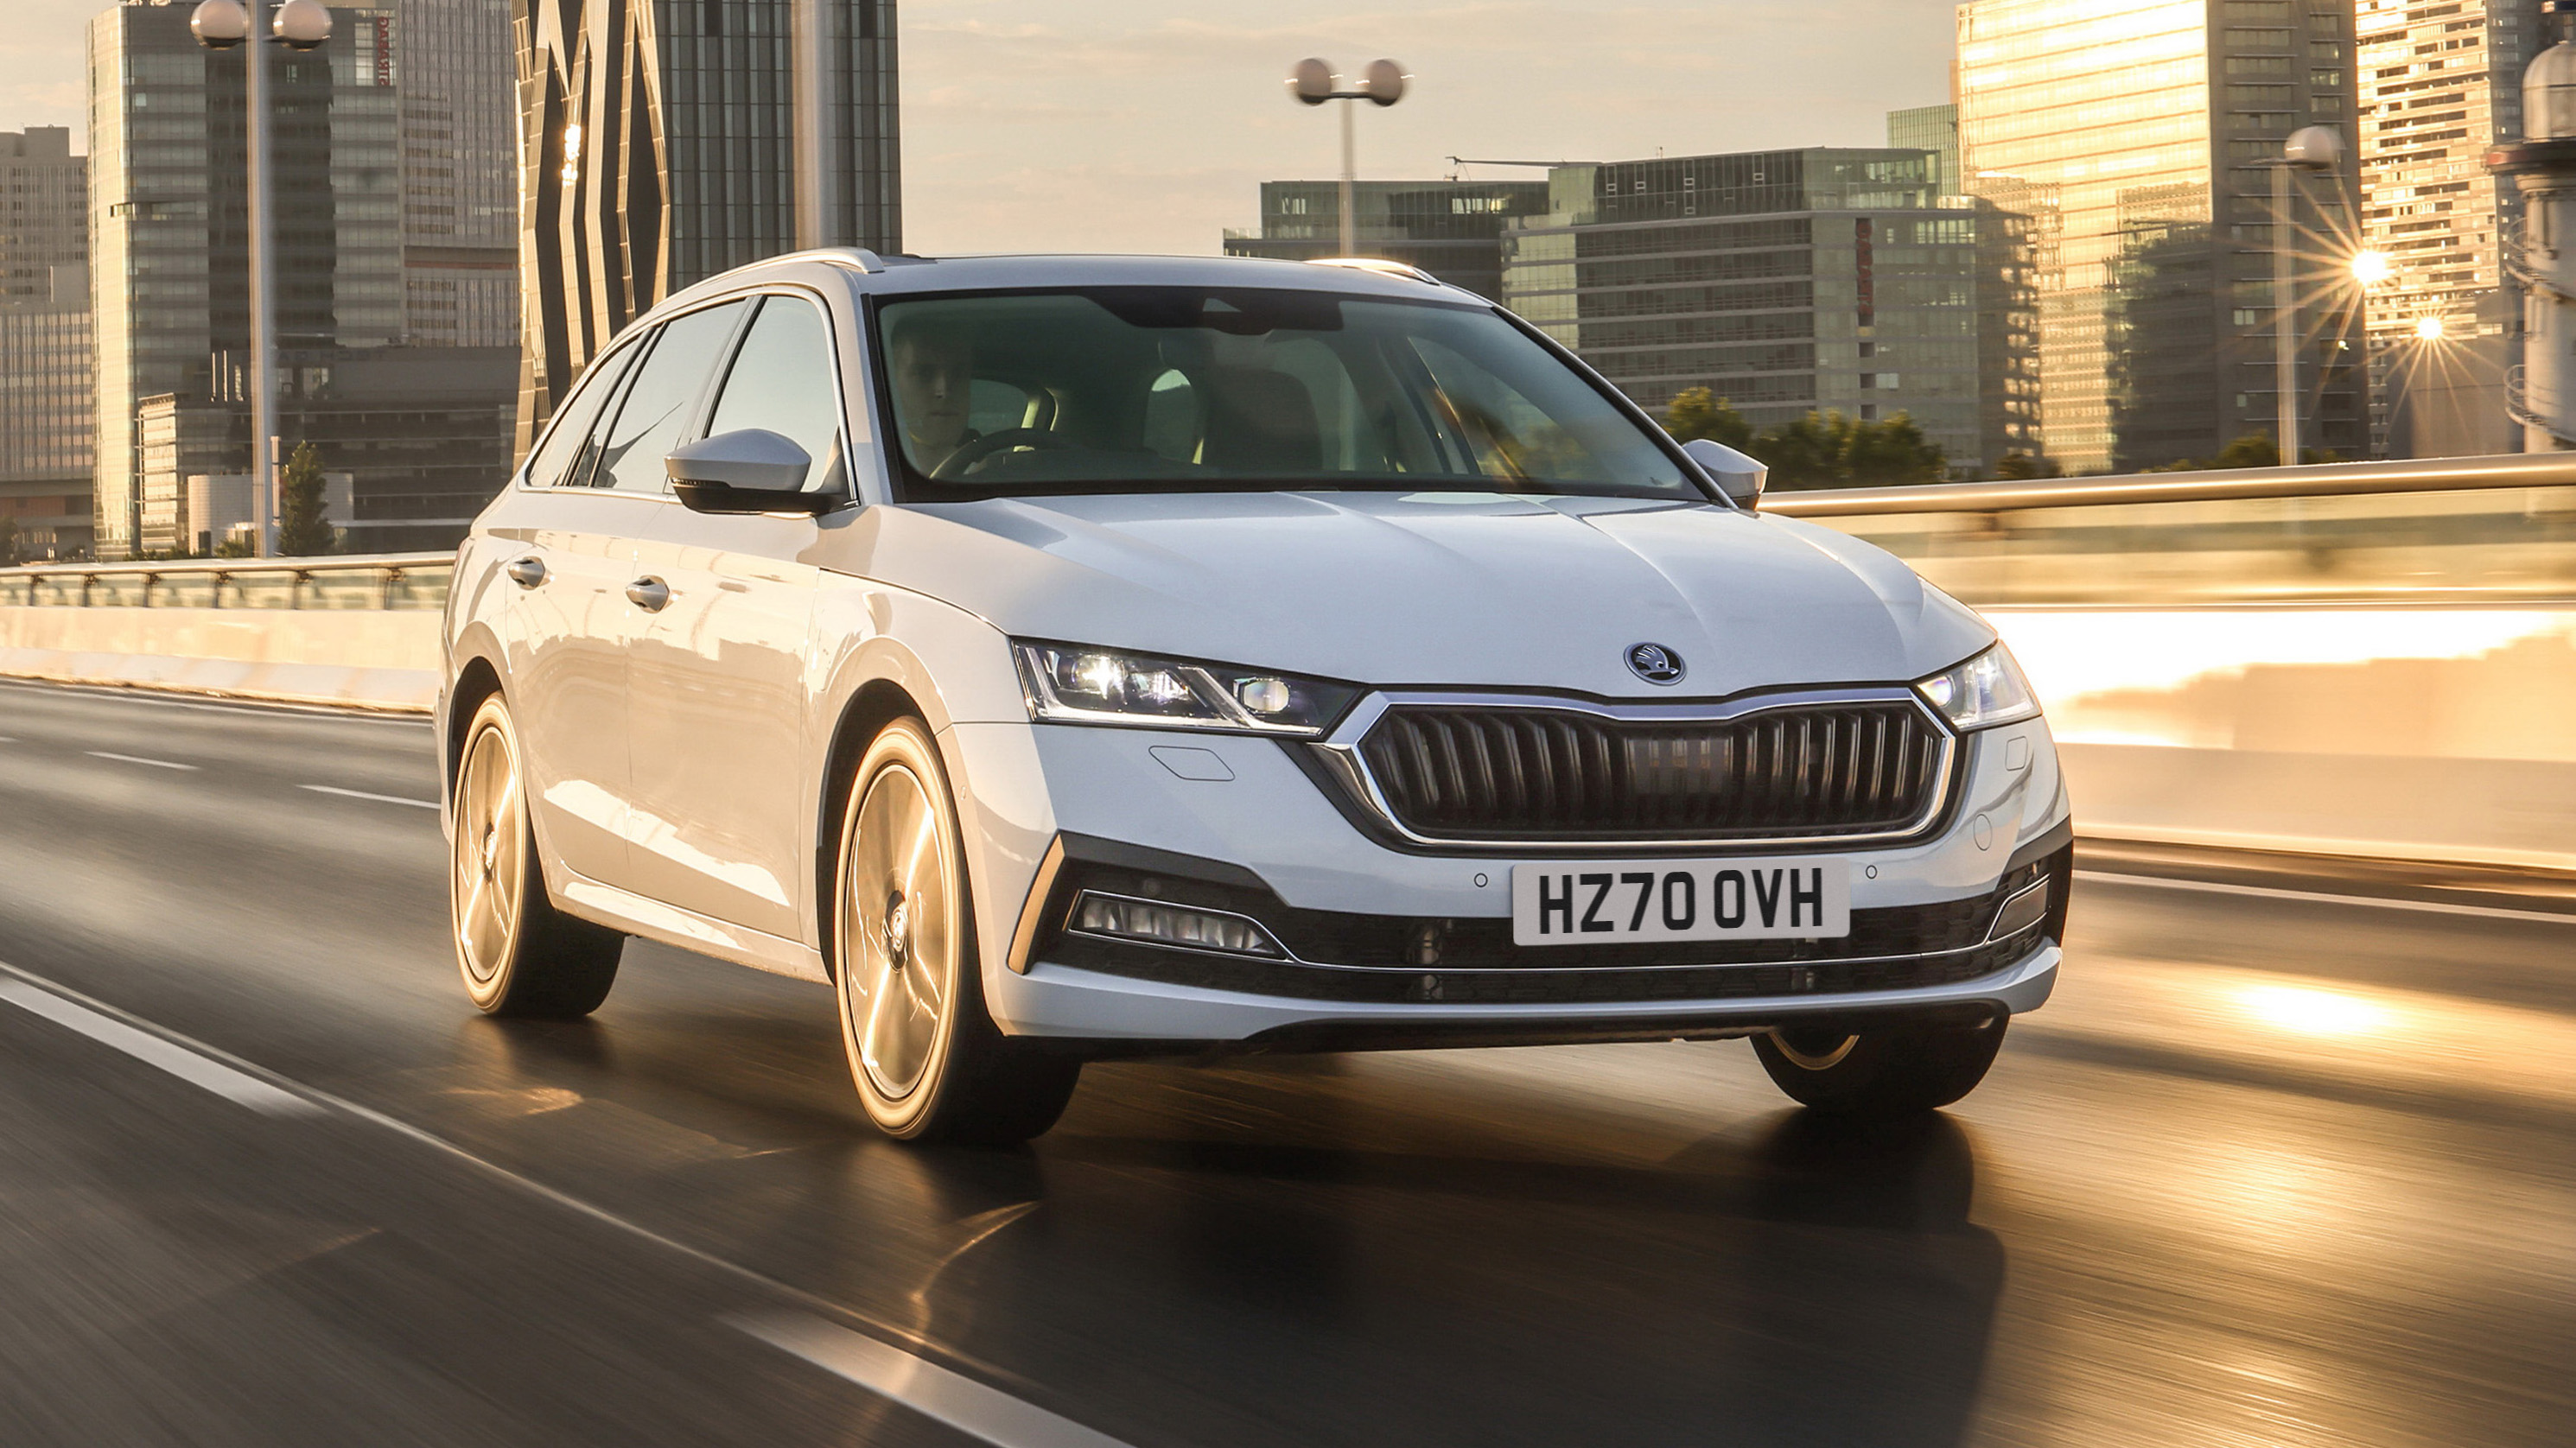 New 2020 Skoda Octavia prices, specs and release date